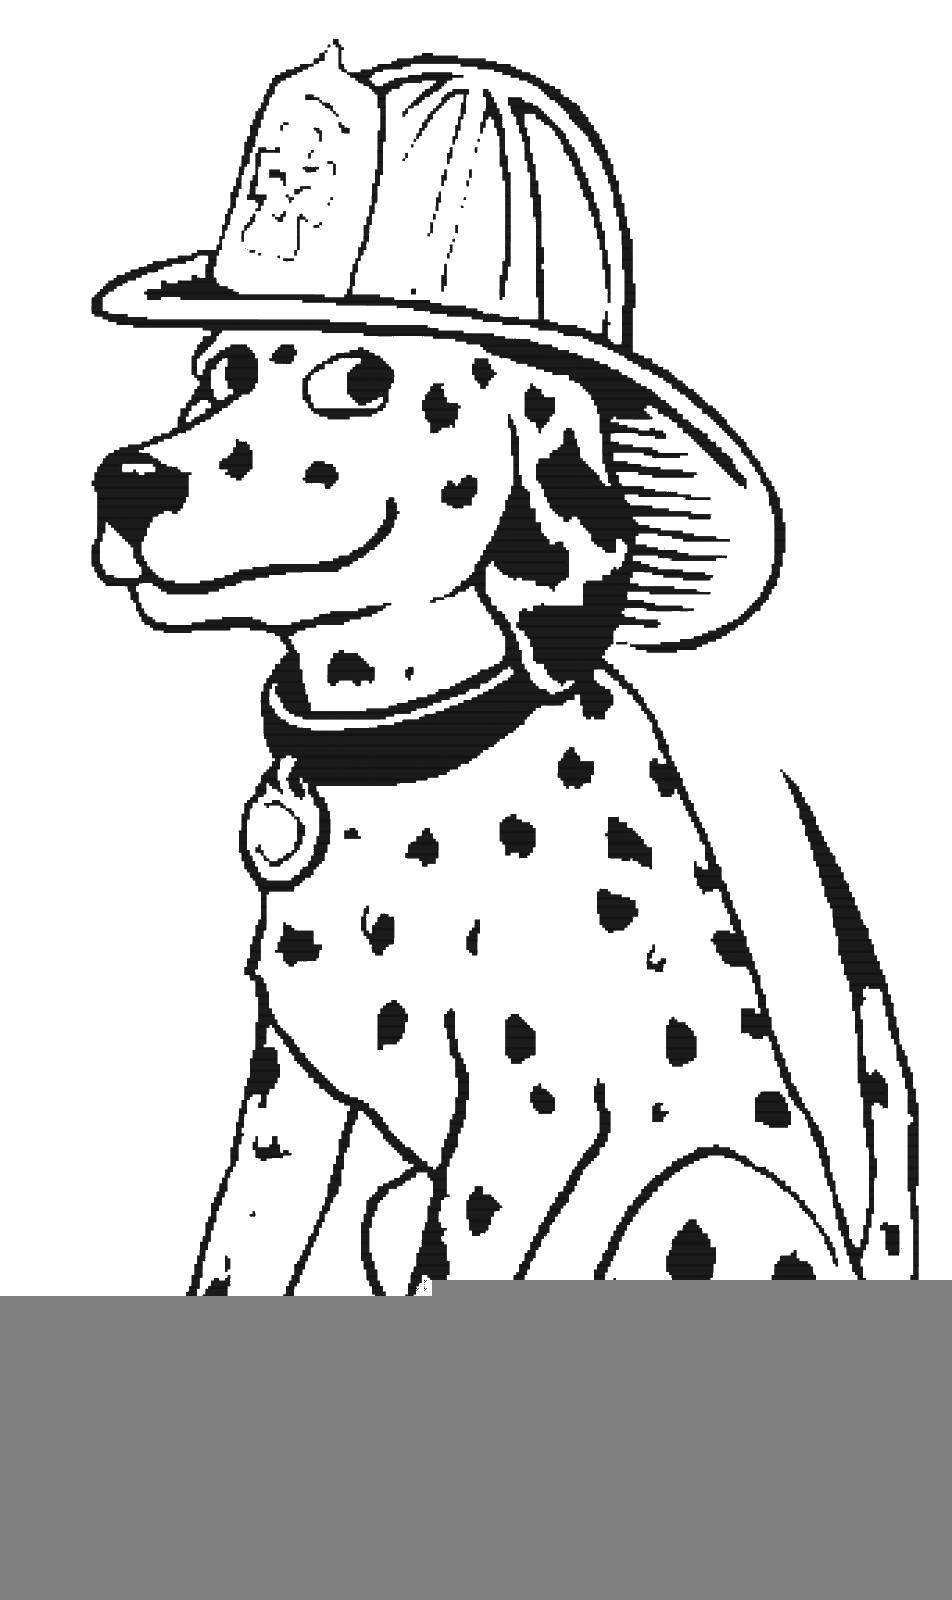 Coloring Dalmatians in fire helmets. Category dogs. Tags:  Dalmatians, helmet, collar, fire.